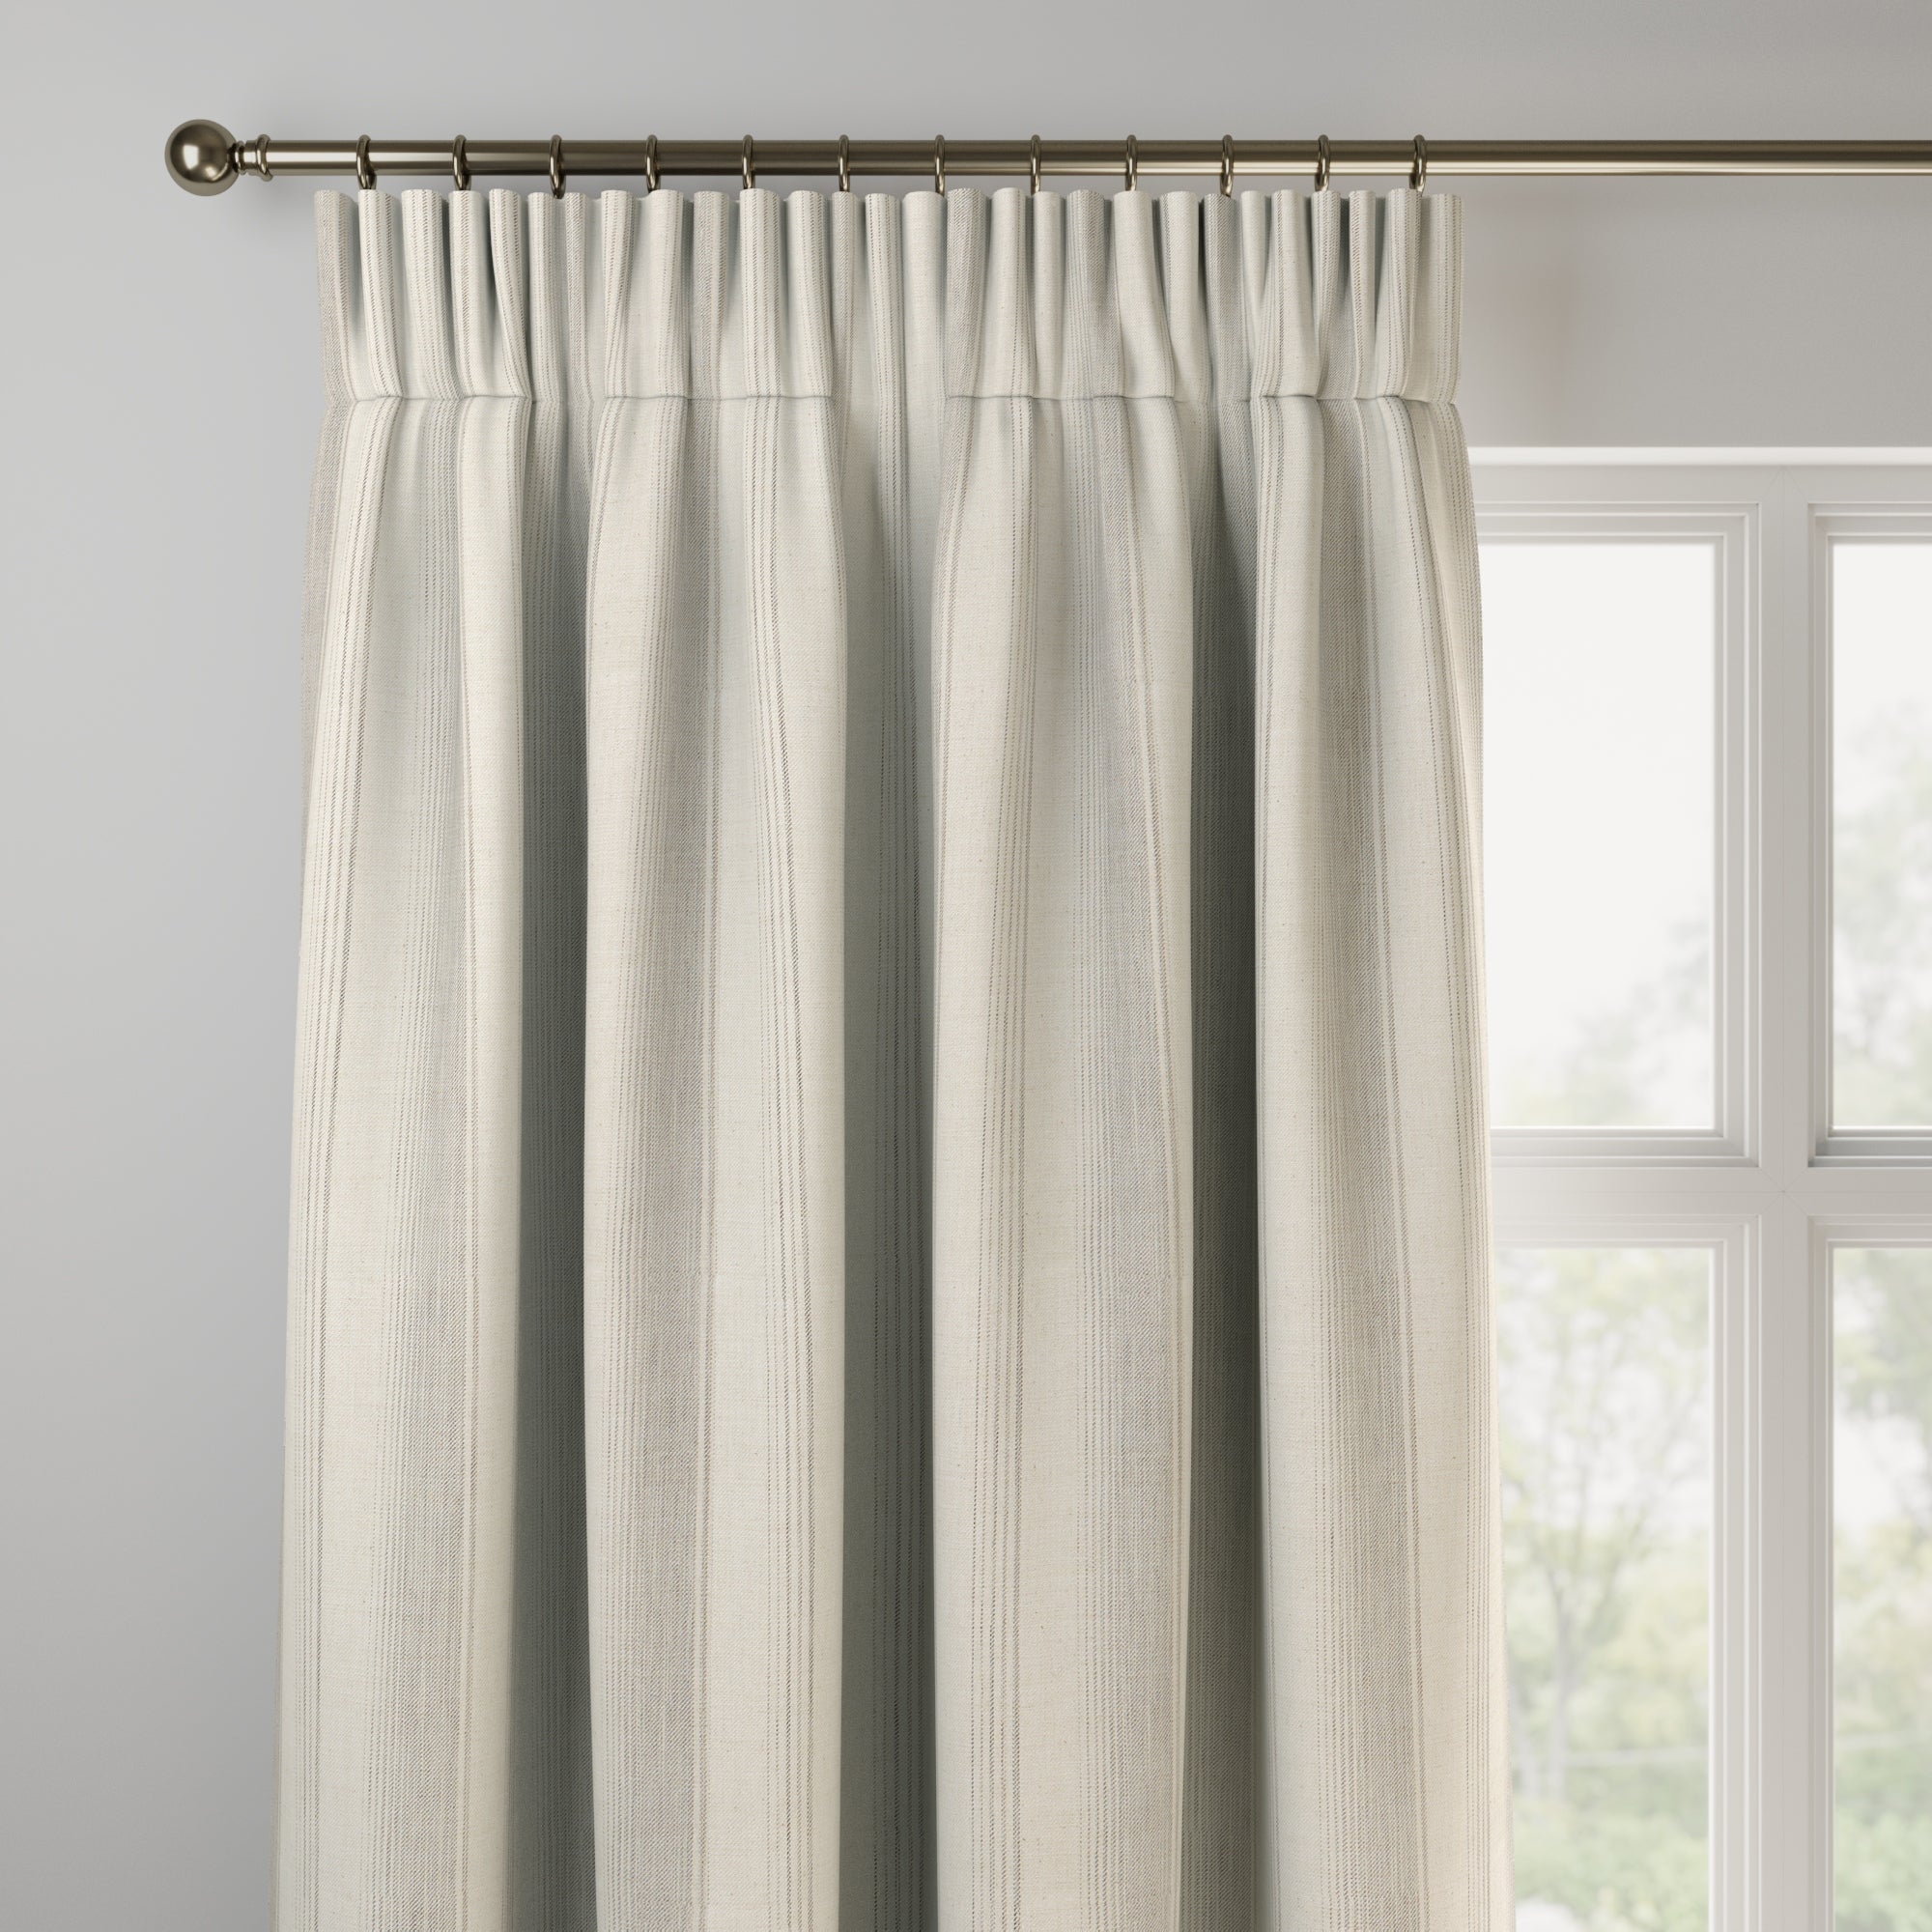 Churchgate Padstow Made to Measure Curtains Churchgate Padstow Dove